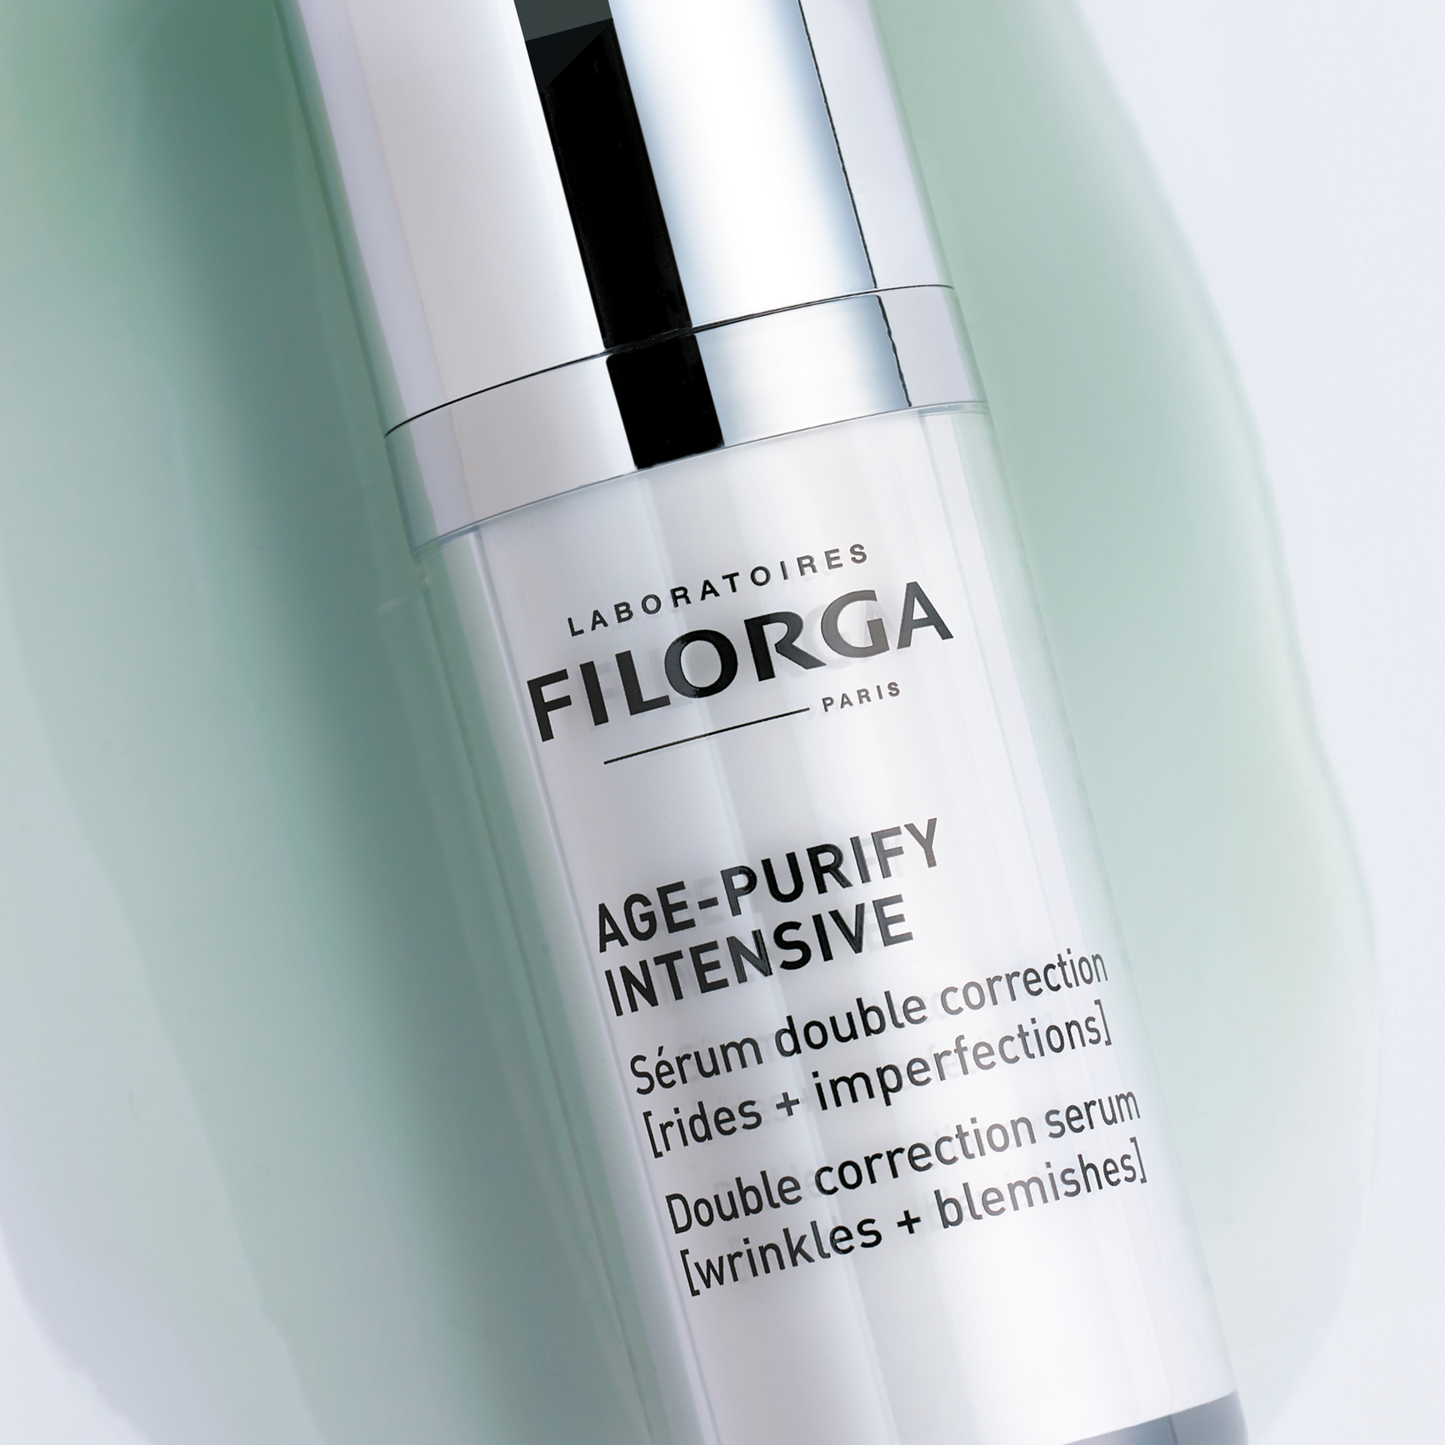 FILROGA AGE-PURIFY INTENSIVE closed bottle on greet texture background